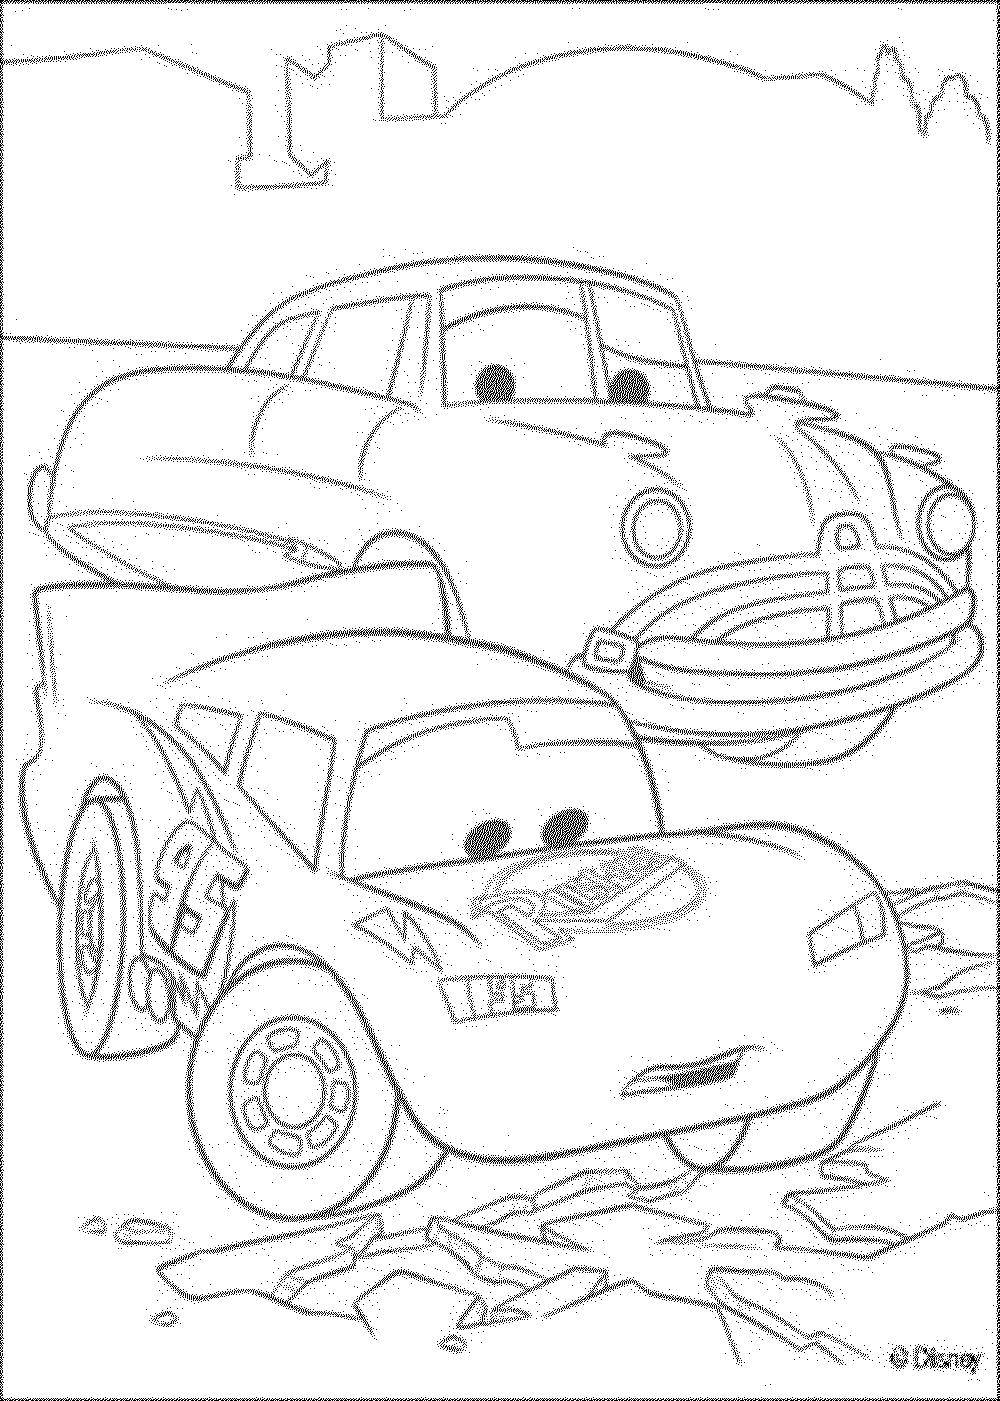 Coloring Lightning McQueen and Doc Hudson. Category Wheelbarrows. Tags:  lightning McQueen, Doc Hudson, cars.